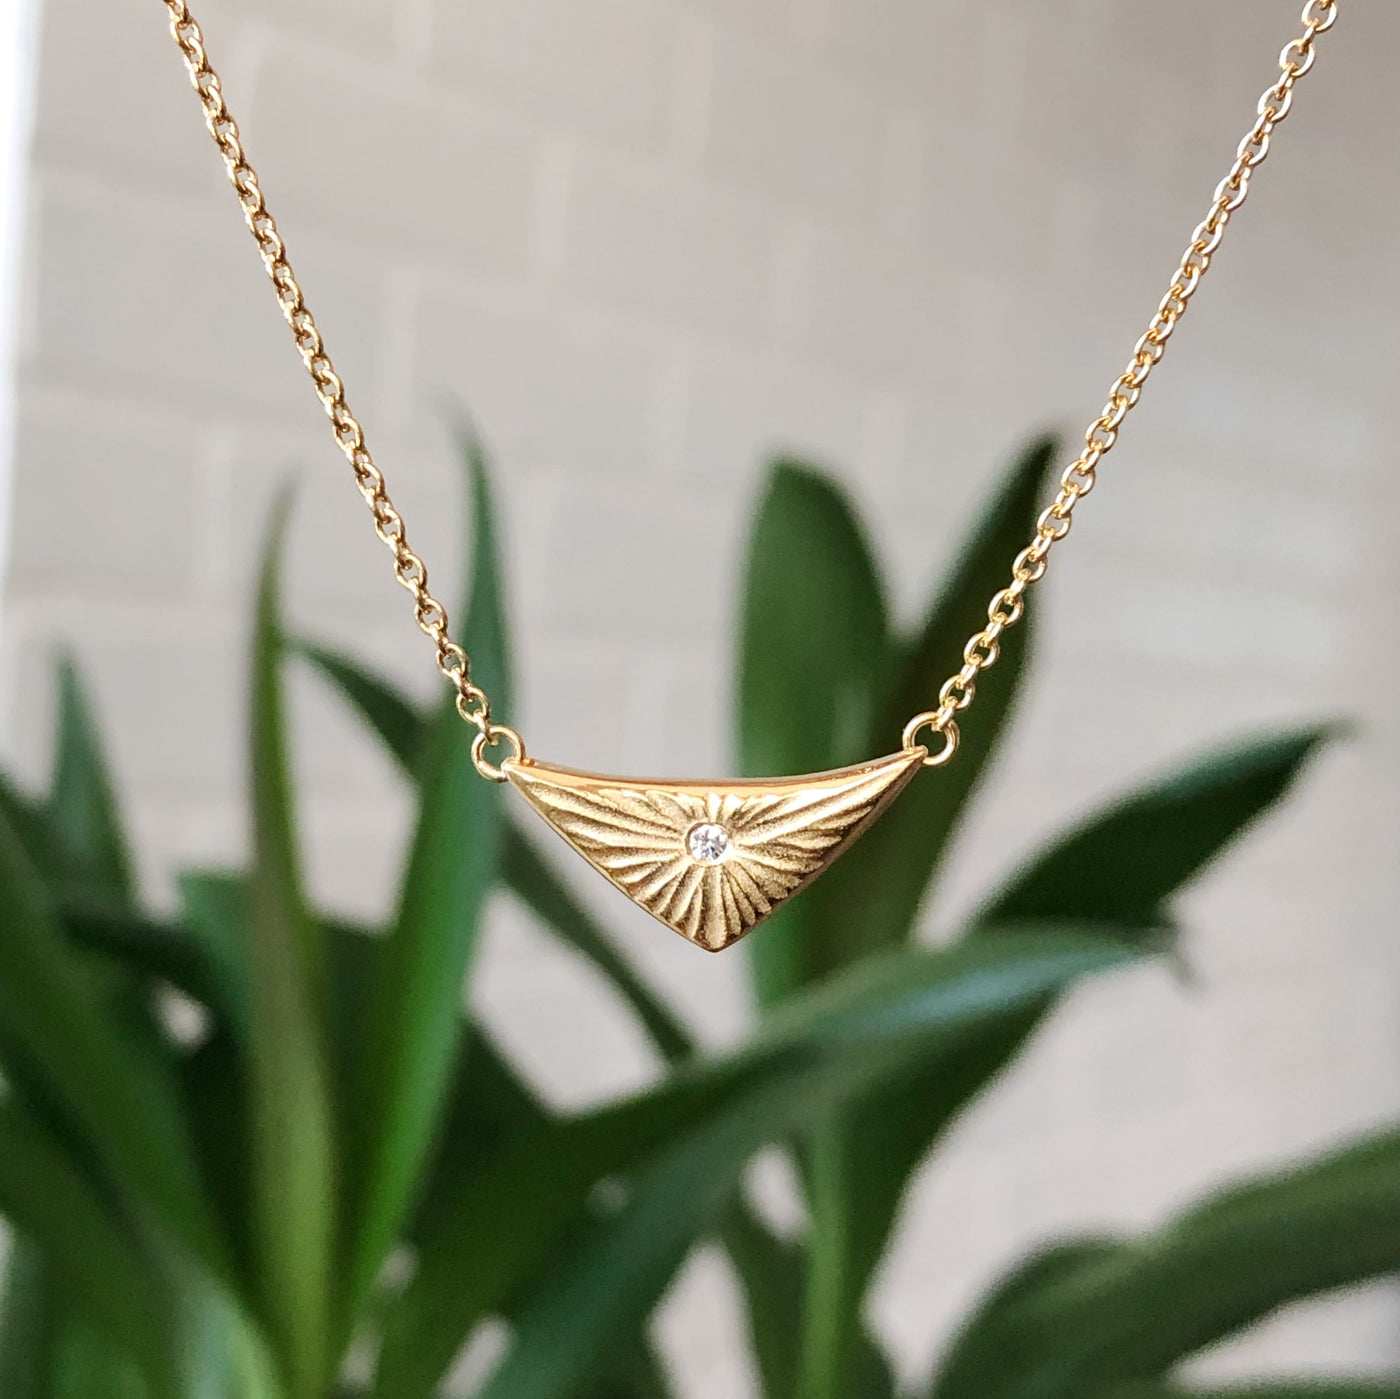 Flash triangular carved sunburst Vermeil Necklace with a diamond center in natural light by Corey Egan